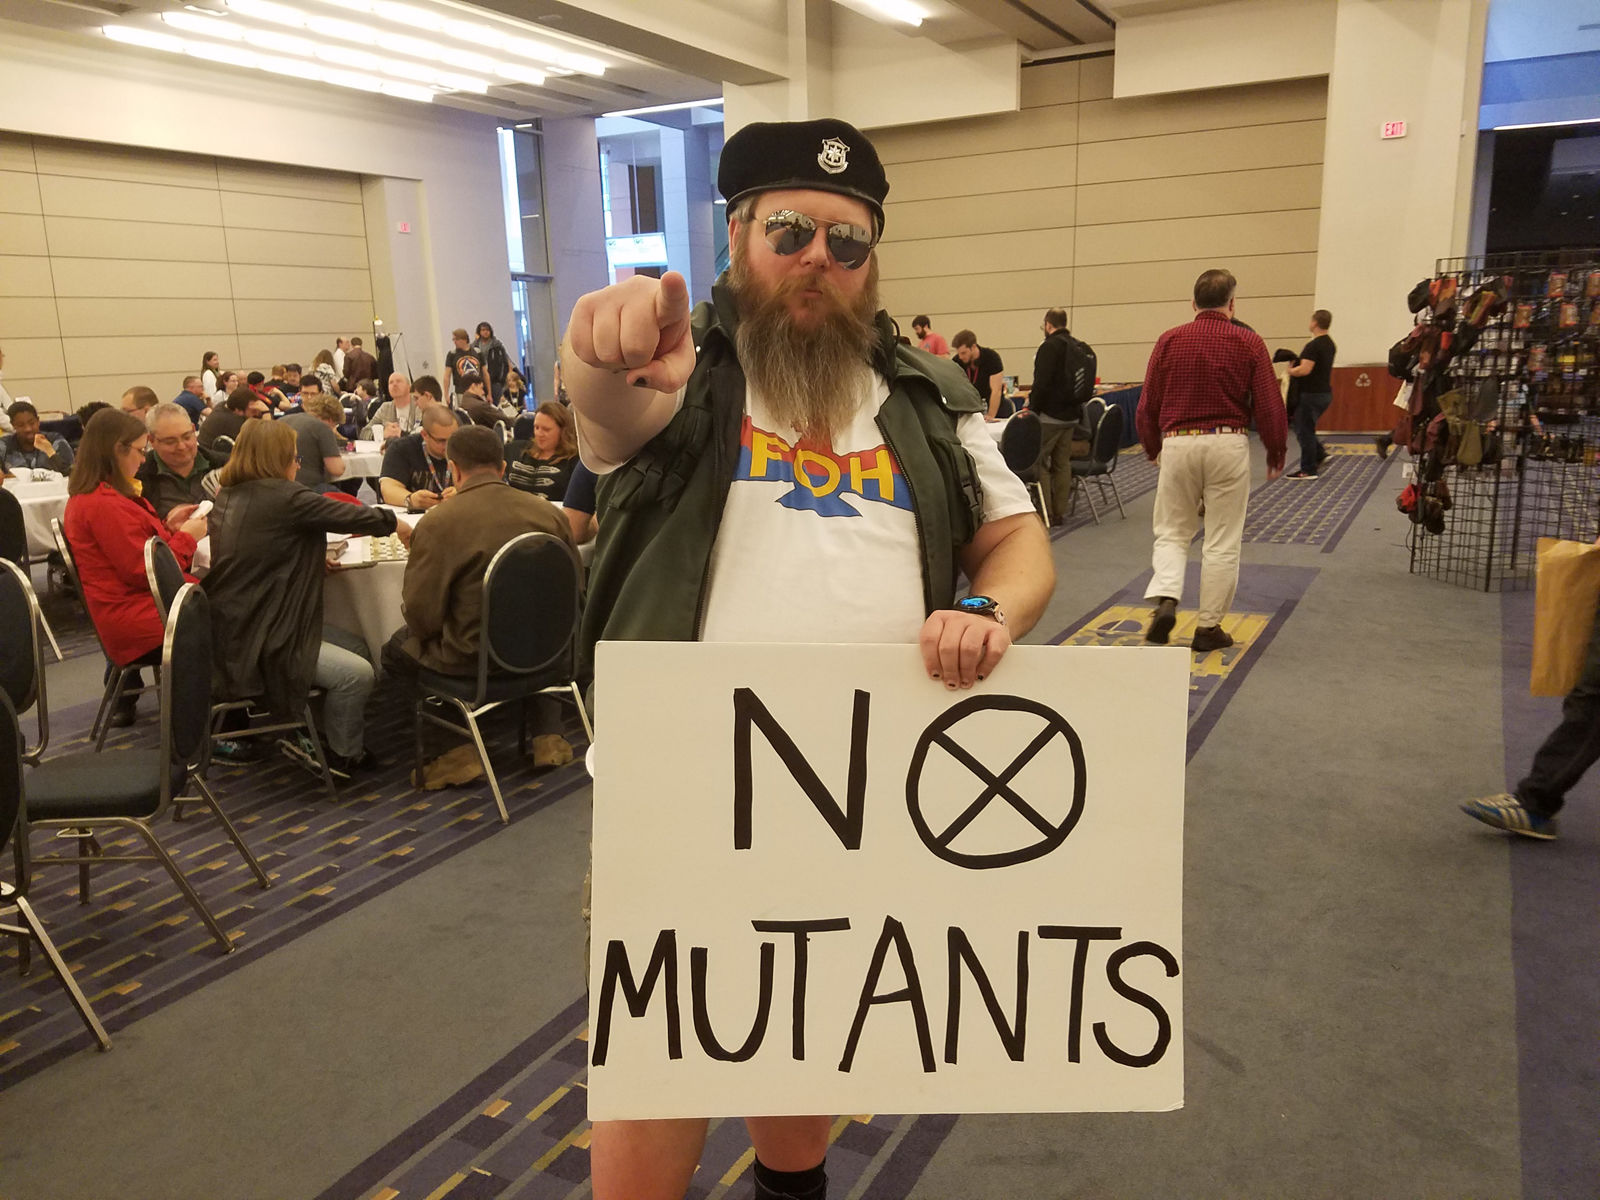 A man holds a sign espousing anti-mutant views at AwesomeCon 2018. (WTOP/Will Vitka)